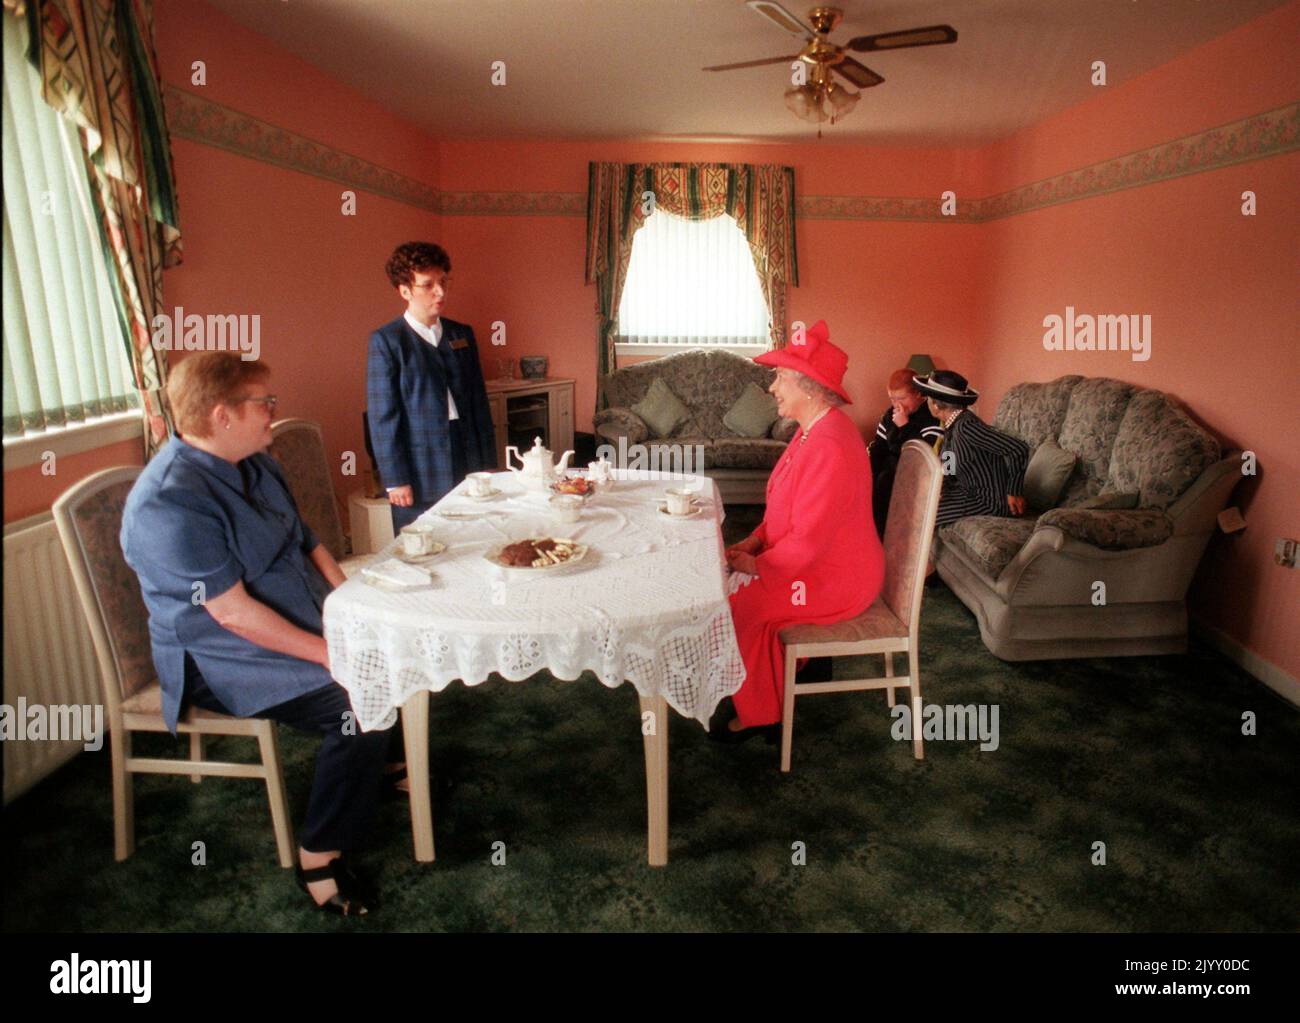 File photo dated 7/7/1999 of Queen Elizabeth II joining Mrs Susan McCarron (front left), her ten-year-old son, James, and Housing Manager Liz McGinniss for tea in their home in the Castlemilk area of Glasgow. Scotland was a special place for the Queen over the decades, both for holidays and royal duties. She spent part of her honeymoon at Birkhall on the rural Balmoral estate in Aberdeenshire and the estate was her favoured residence in Scotland. Issue date: Thursday September 8, 2022. Stock Photo